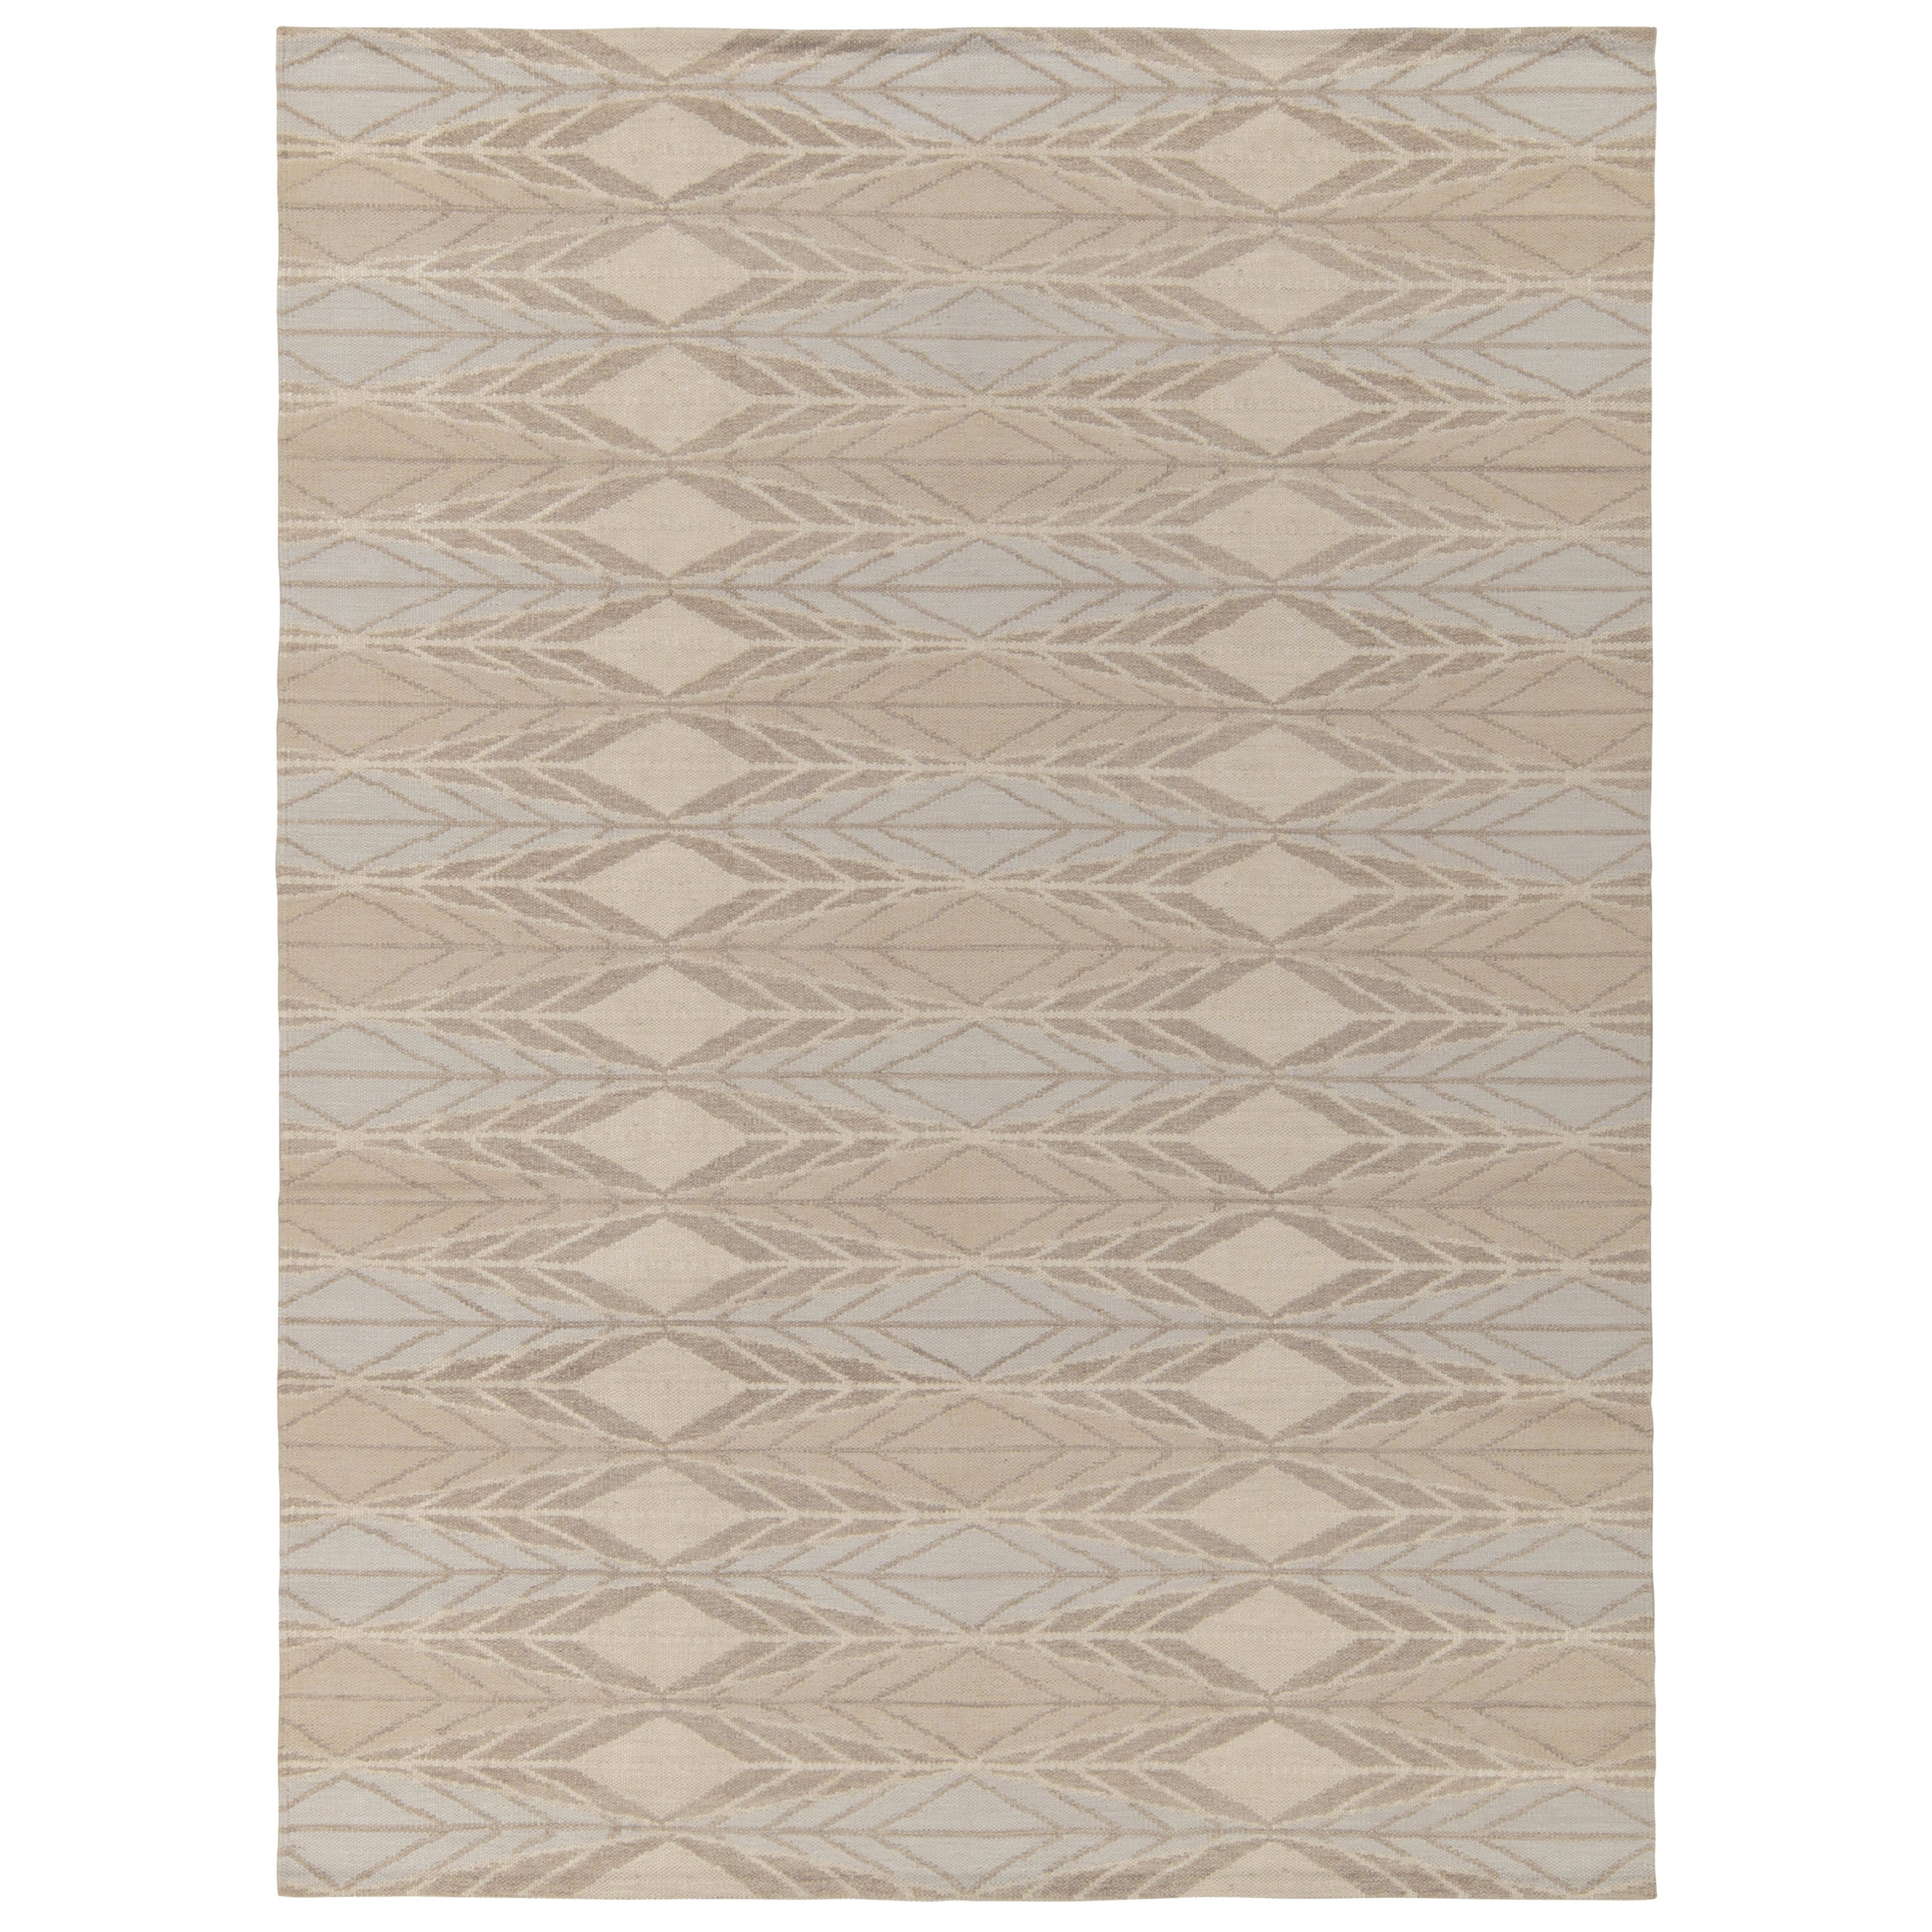 Rug & Kilim’s Scandinavian Style Kilim in Taupe, Blue and Off-White Patterns For Sale